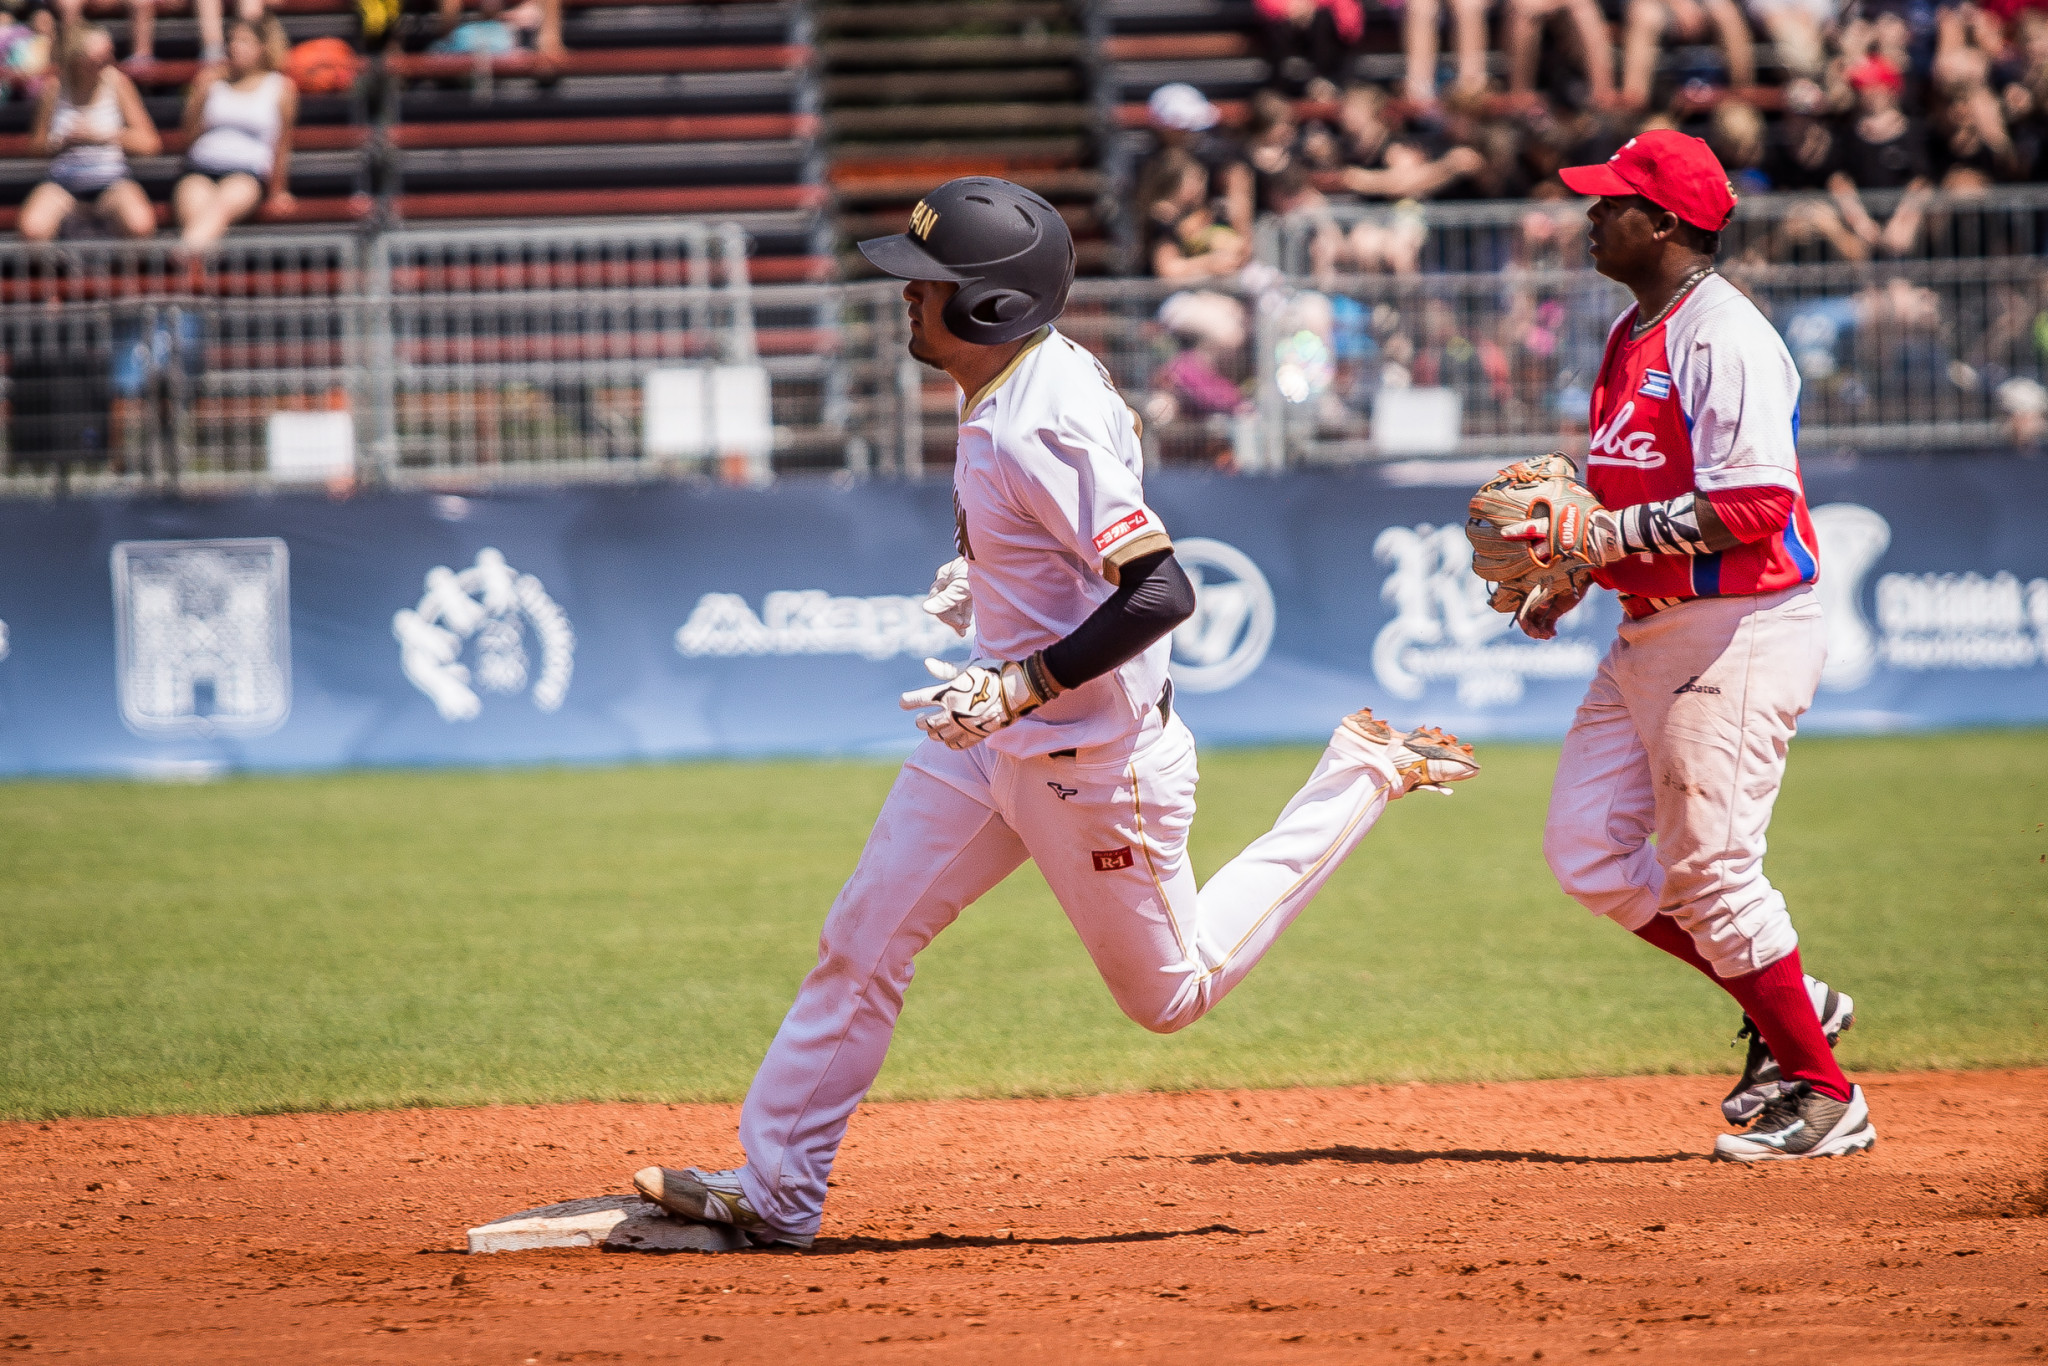 Japan secured first place in Group A with a 2-0 win over Cuba as action continued today at the WBSC Men's Softball World Championship in Czech Republic ©WBSC